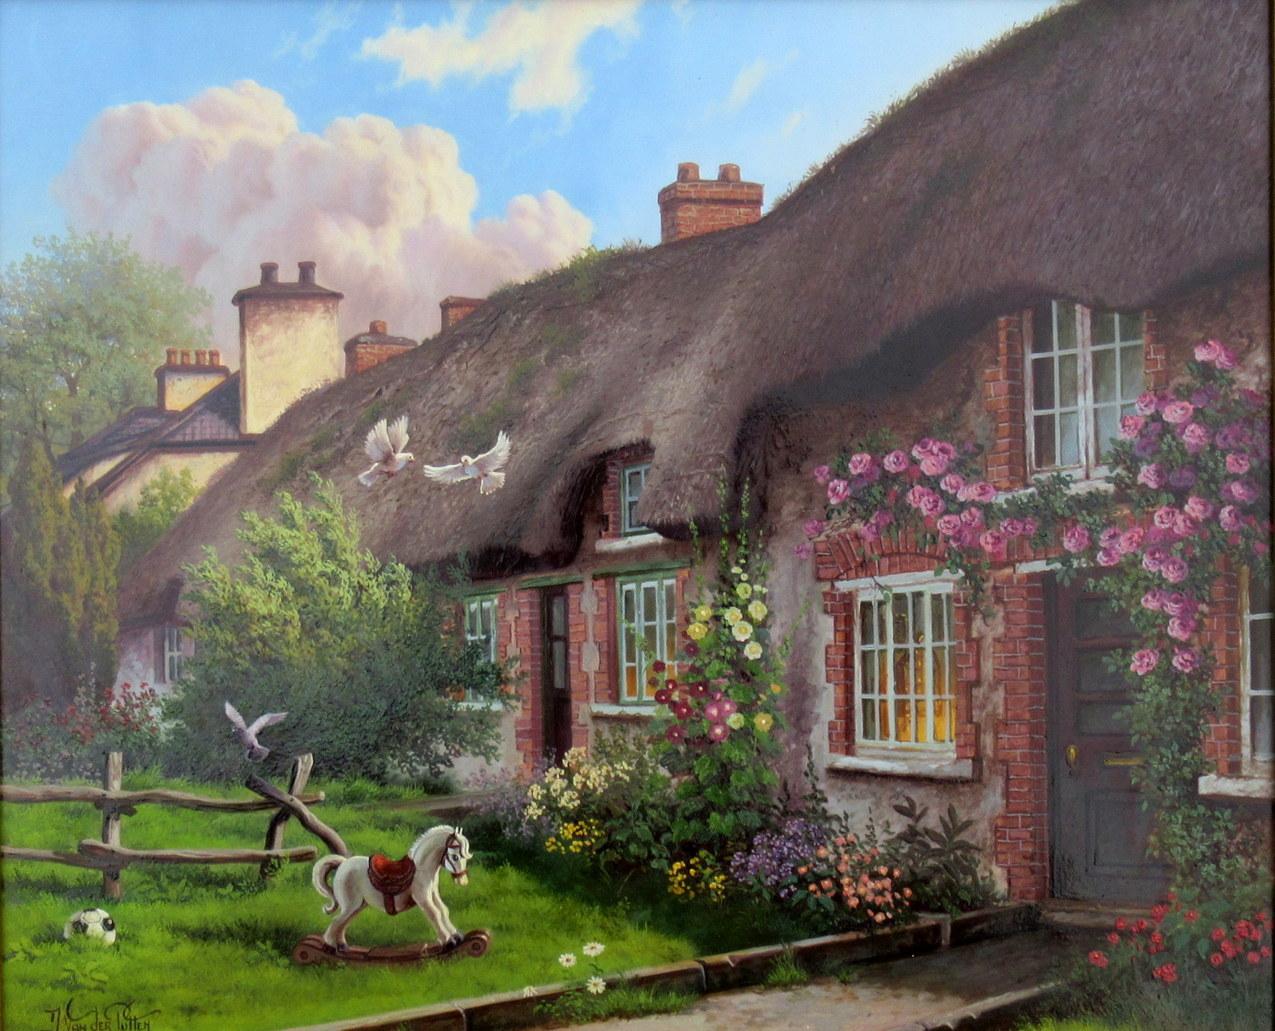 Superb Painting by Daniel Van der Putten, a view of a row of traditional thatched Cottages in Adare village, one of Ireland’s most scenic West of Ireland Villages in County Limerick. This vintage evening view depicts a row of Rose covered thatched